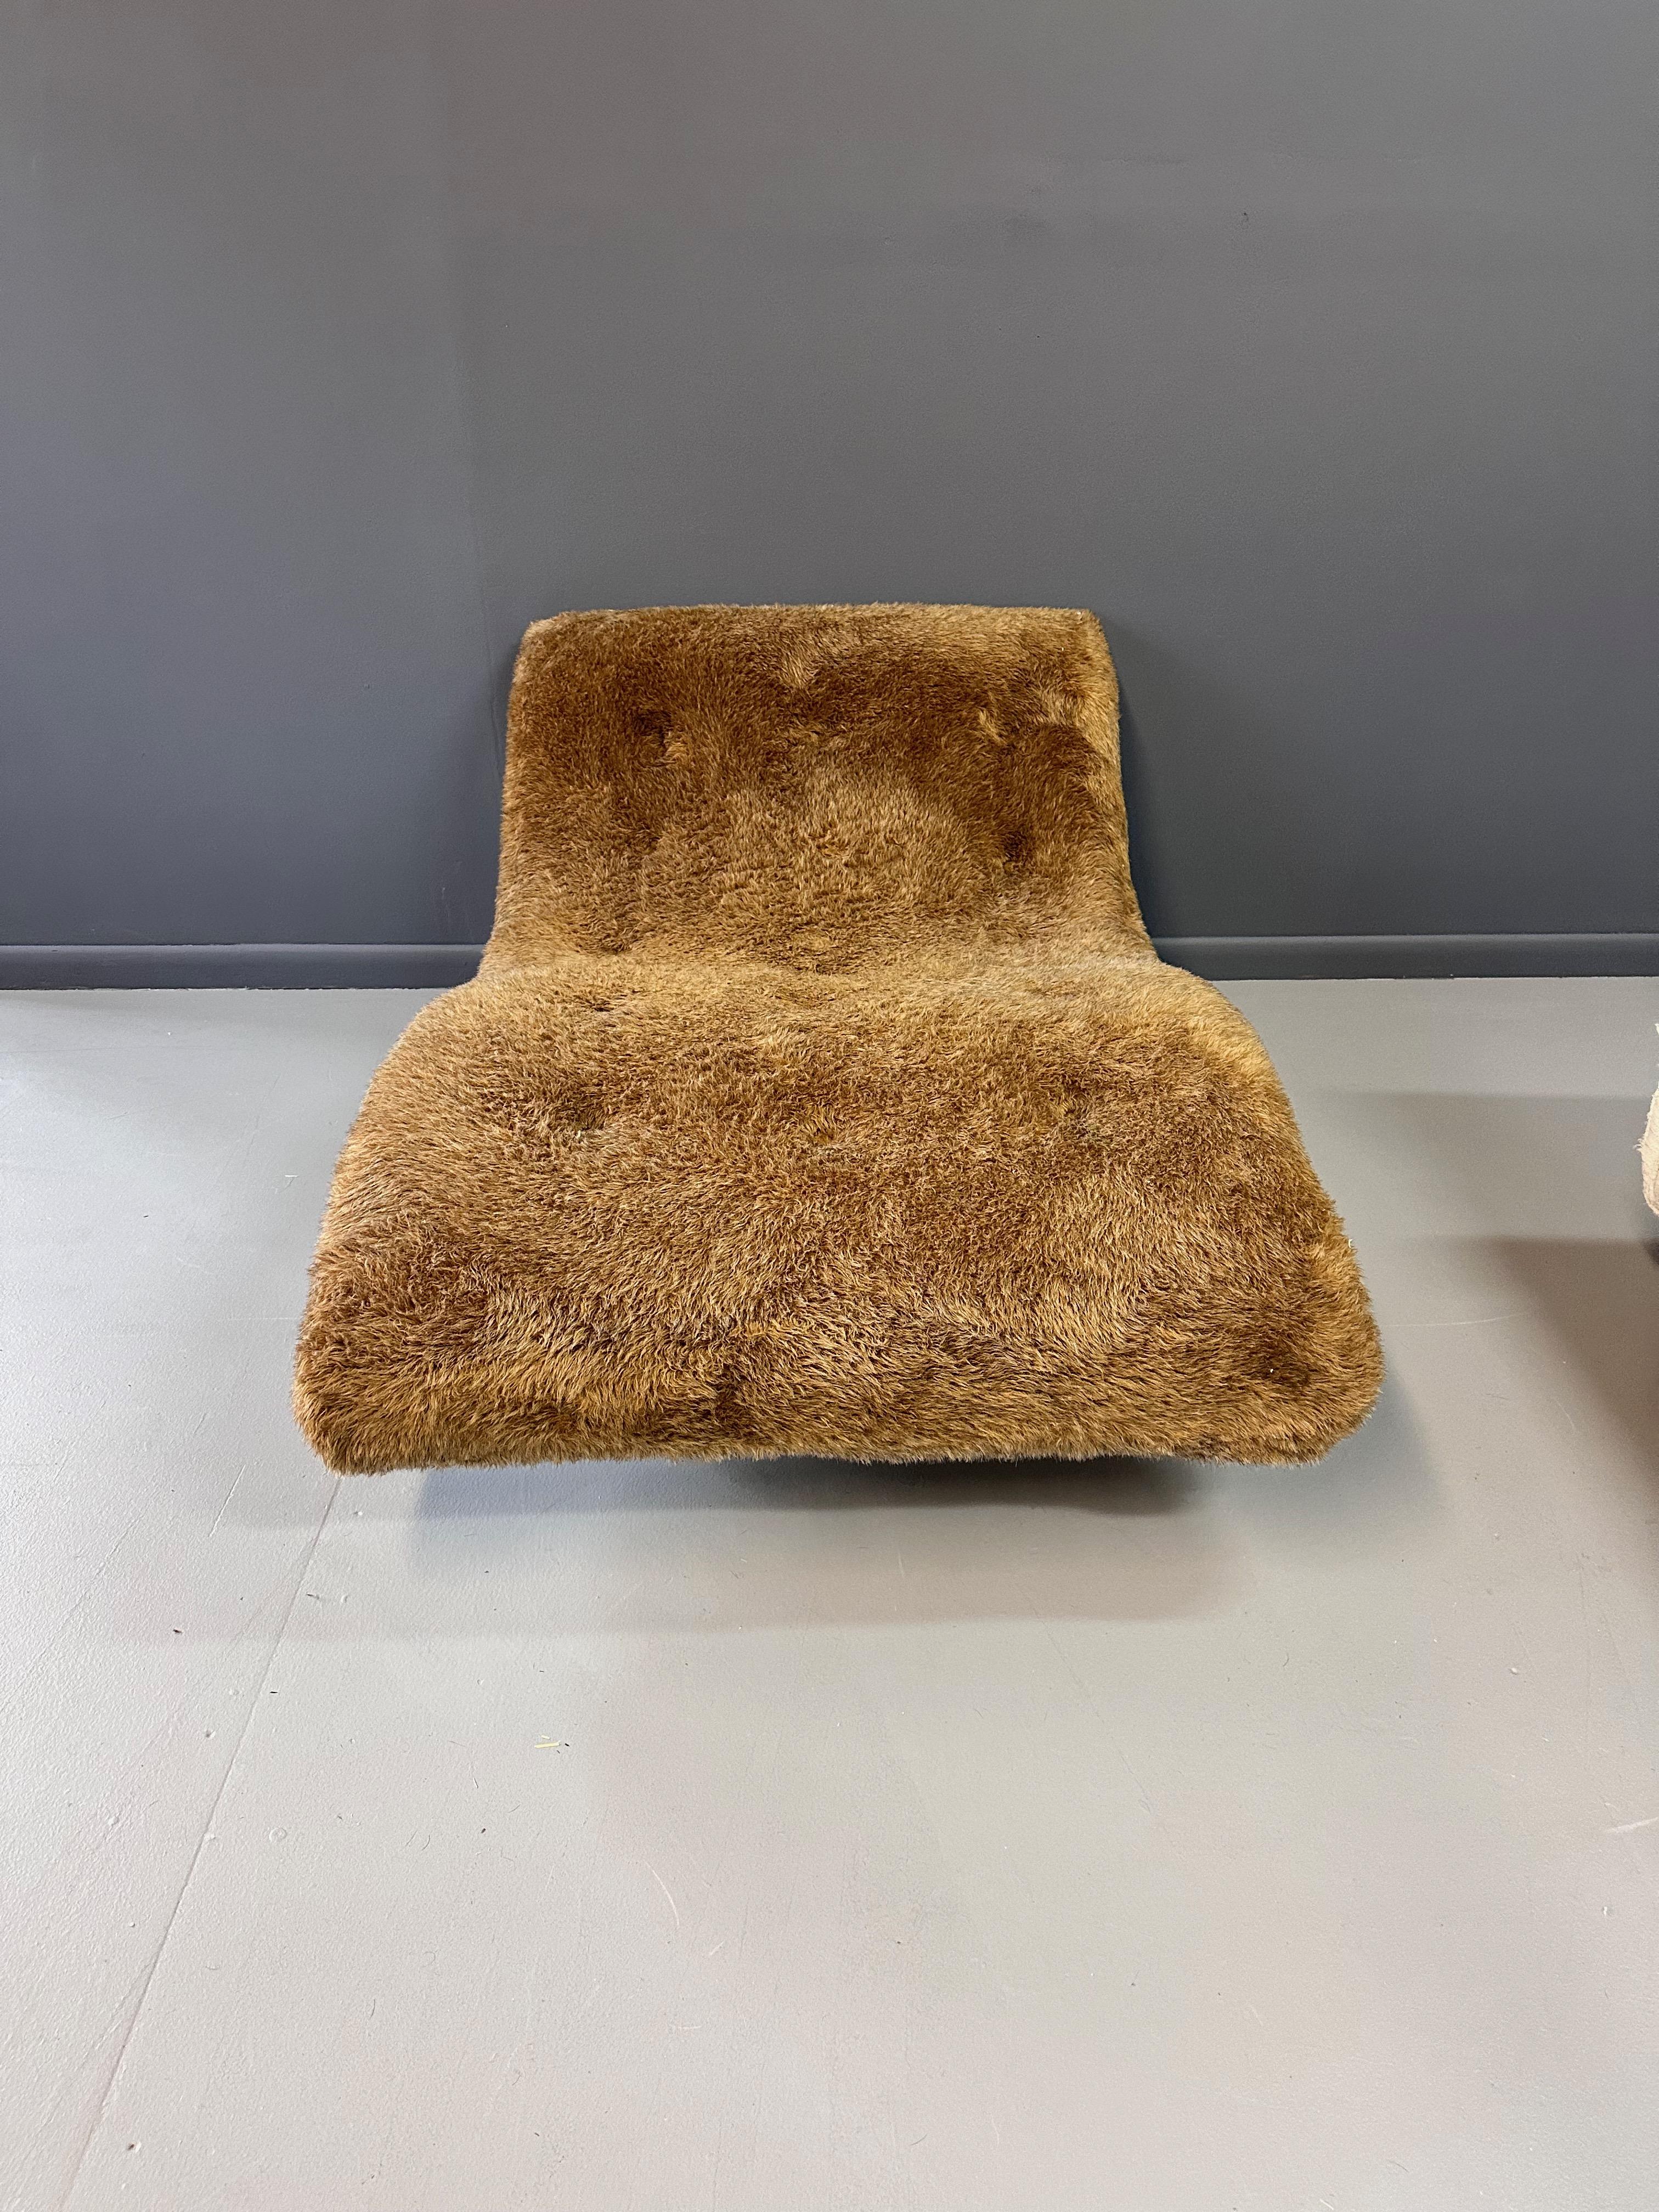 North American Adrian Pearsall Style 1970s Wave Lounge Chair in a Fun Faux Fur Mid Century For Sale